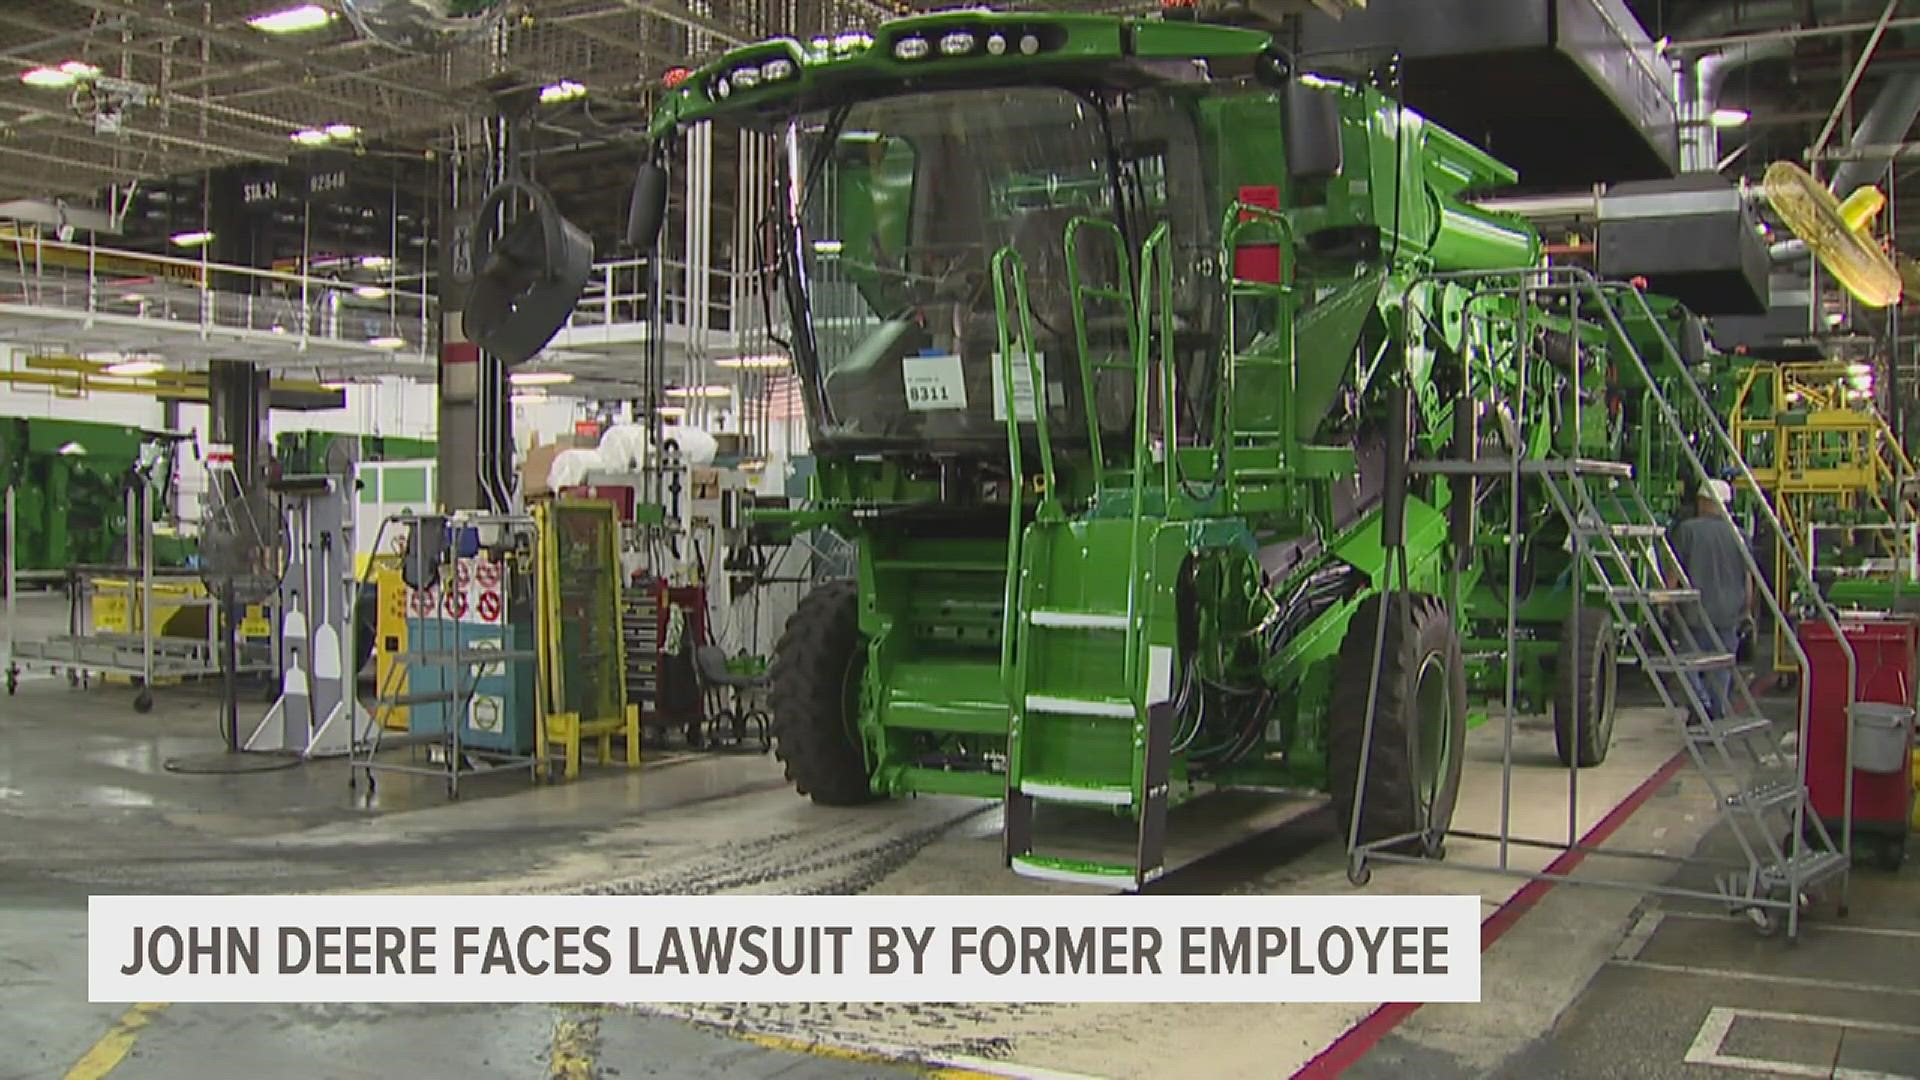 The suit alleges Deere fired Daniel White after he brought up safety concerns with batteries being used for equipment.